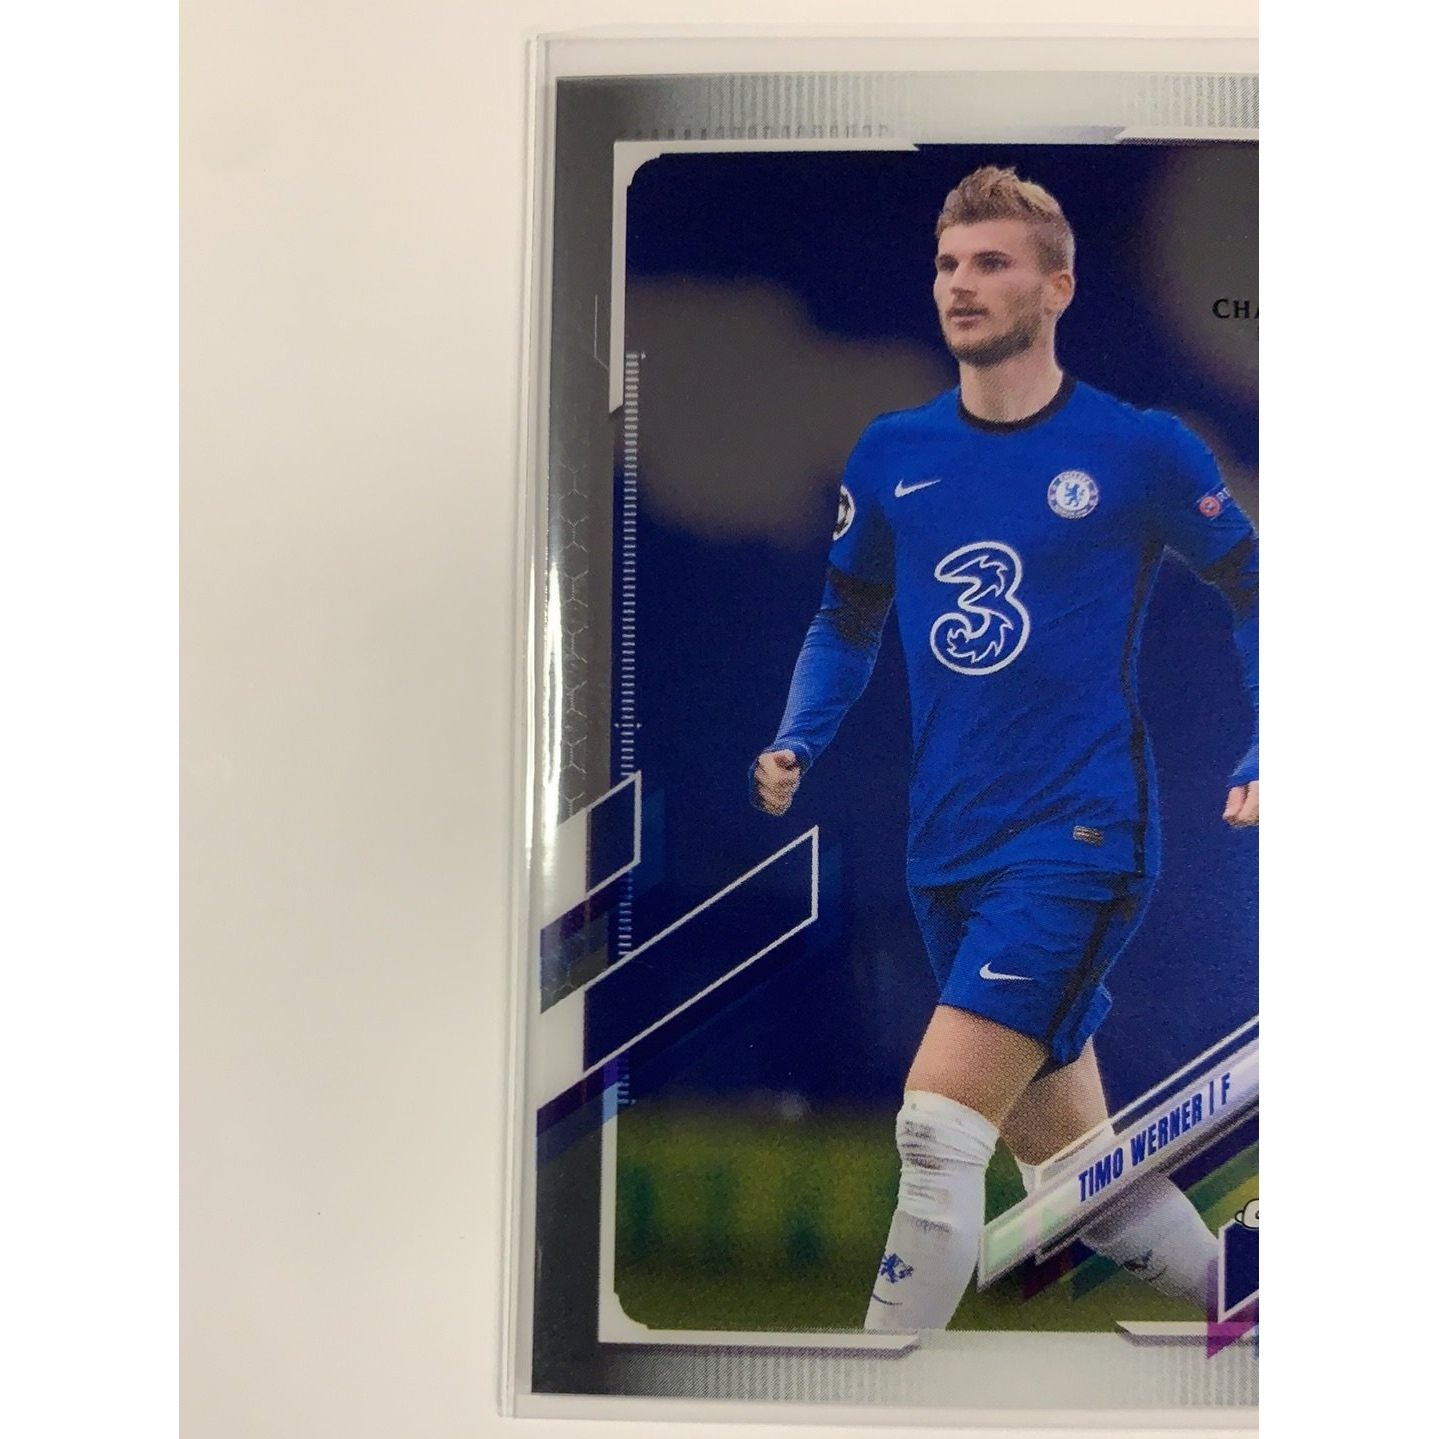  2021 Topps Chrome UEFA Champions League Timo Werner Base #25  Local Legends Cards & Collectibles